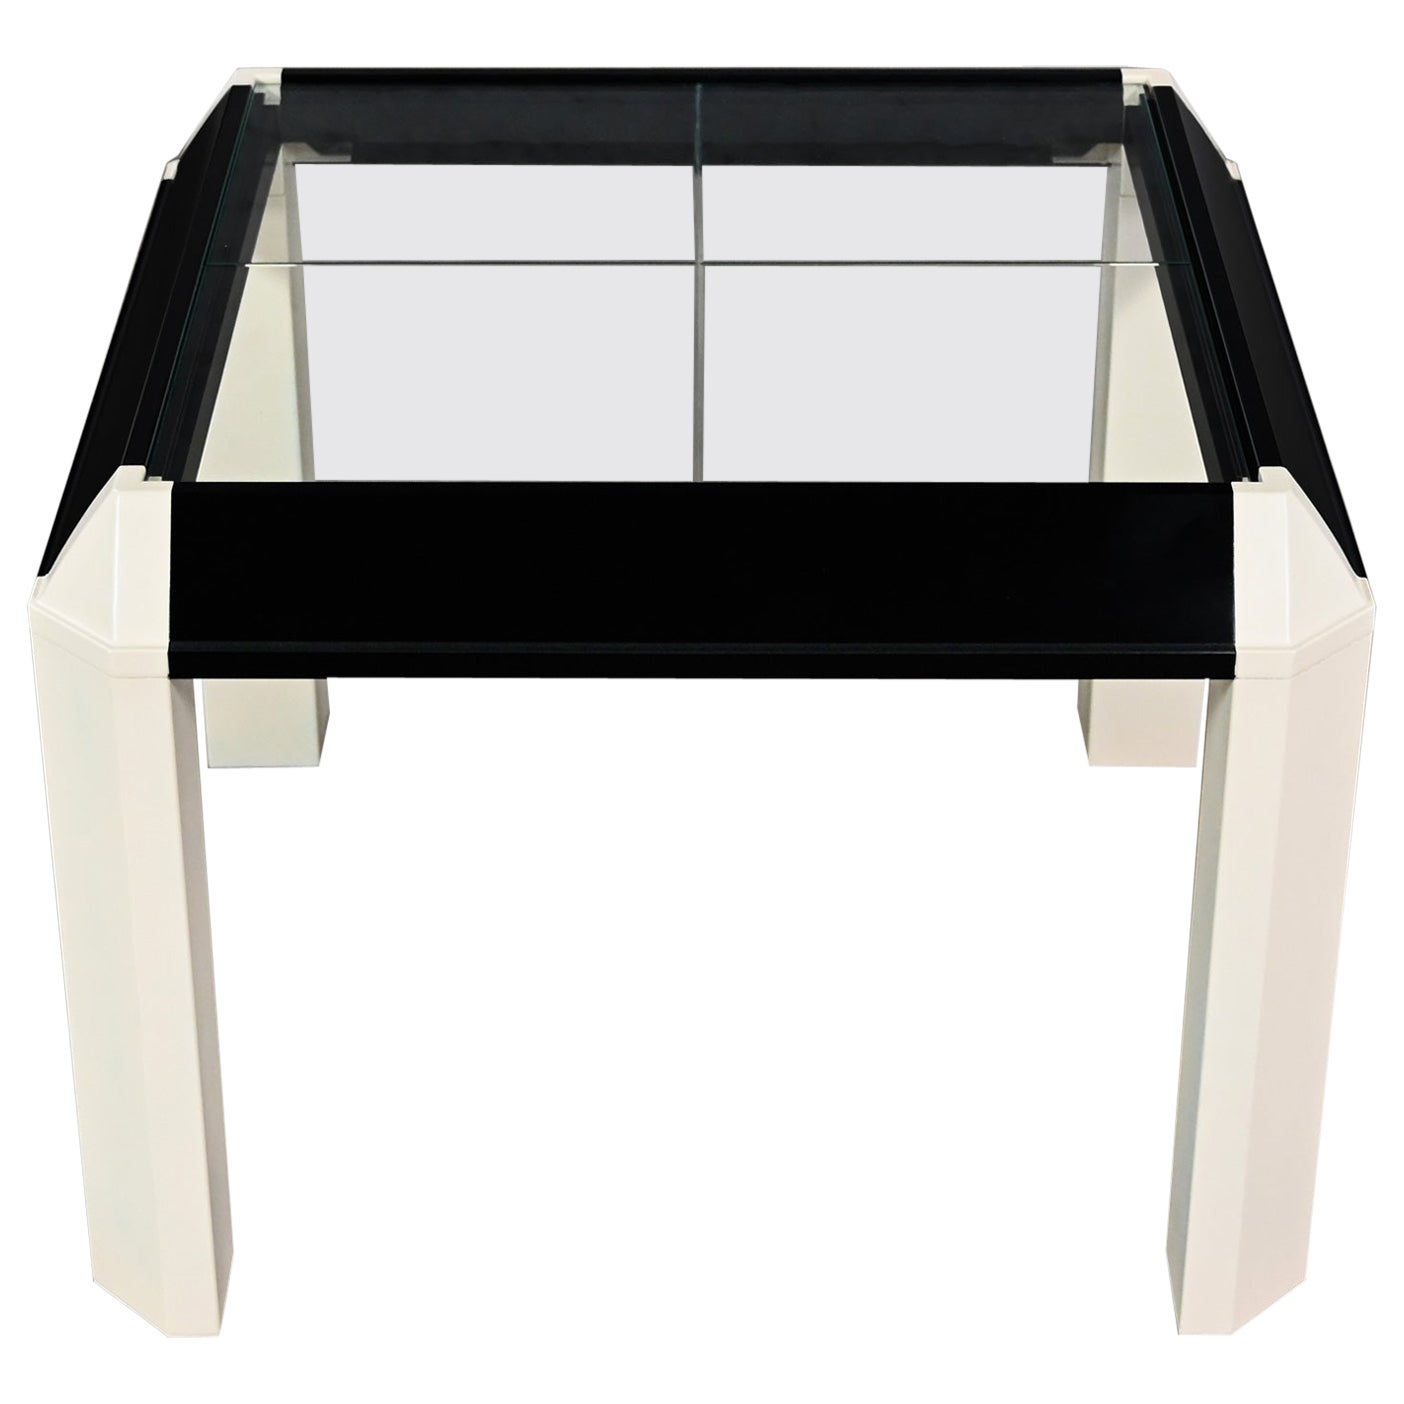 Postmodern End Table Black Painted Frame Off White Trapezoid Legs Glass Top For Sale